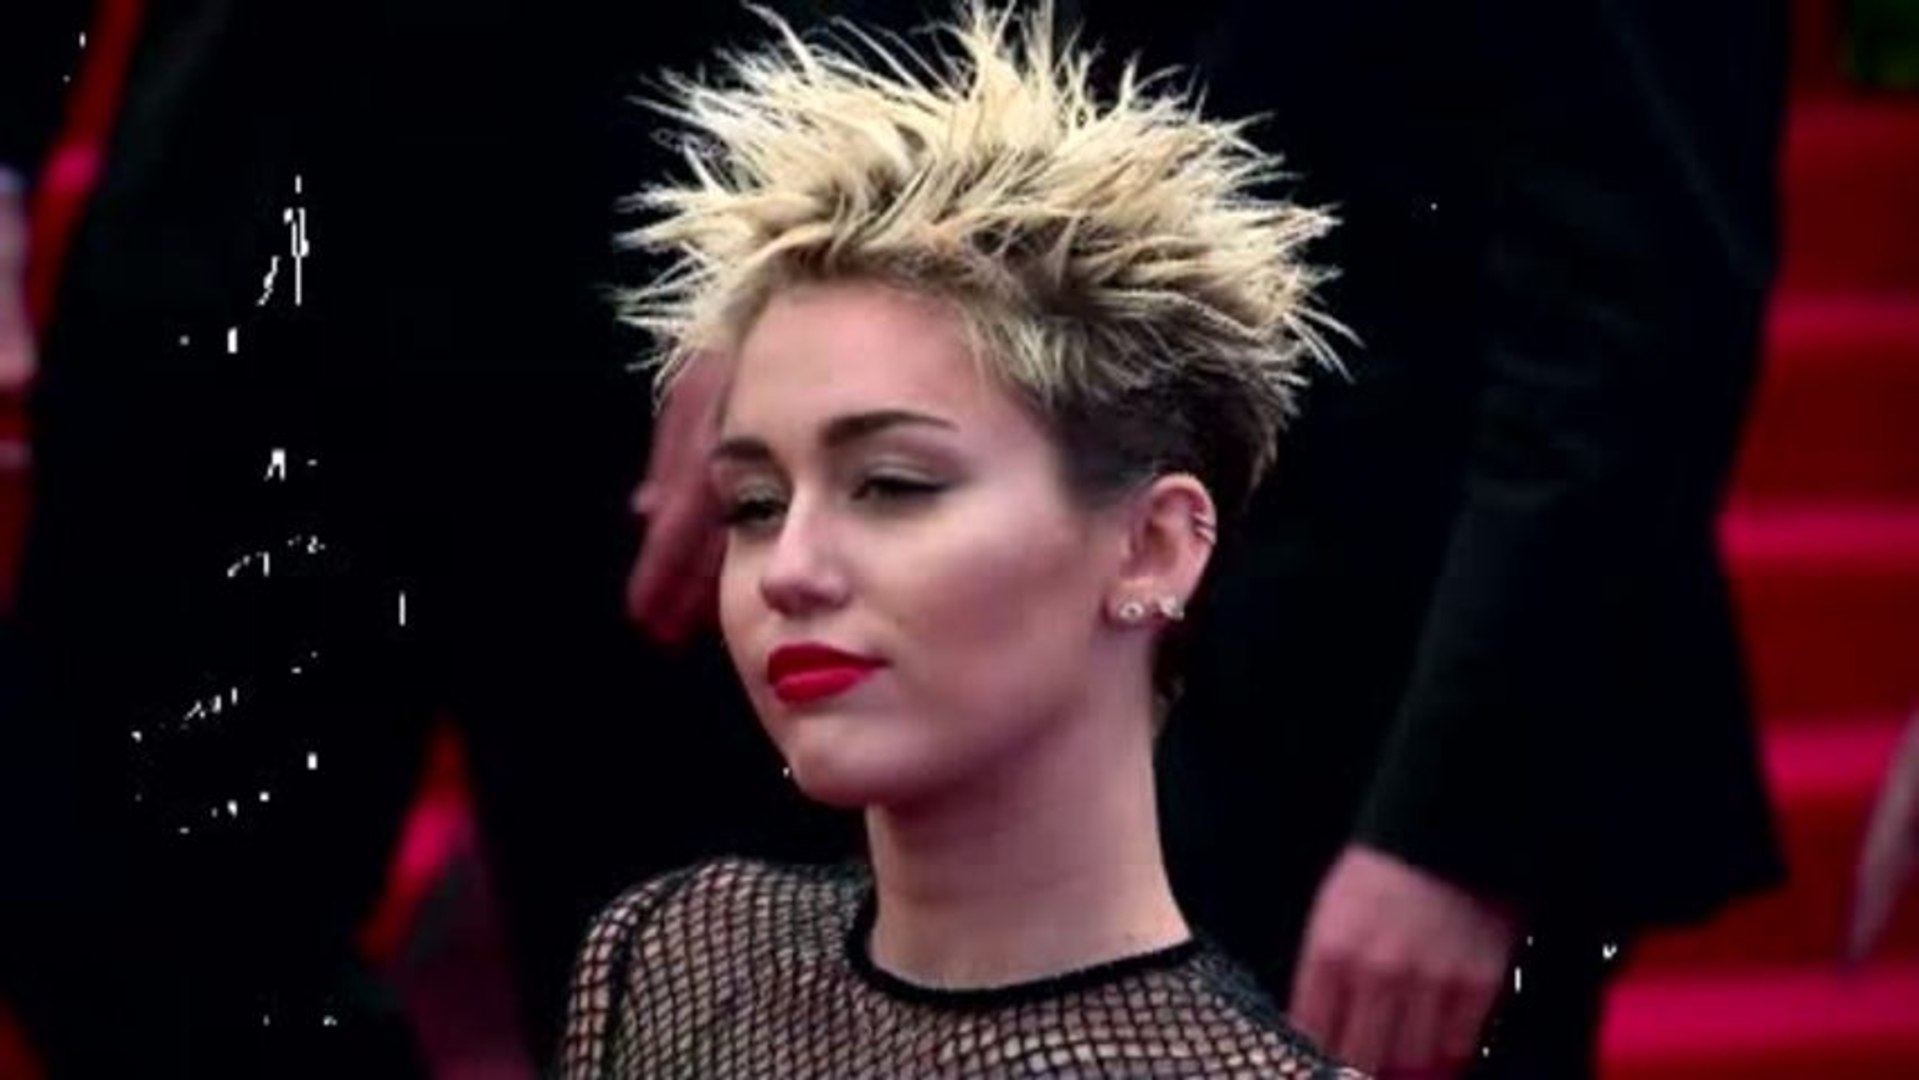 Miley Cyrus Says She's 'So Sad' After Amanda Bynes Calls Her 'Ugly'